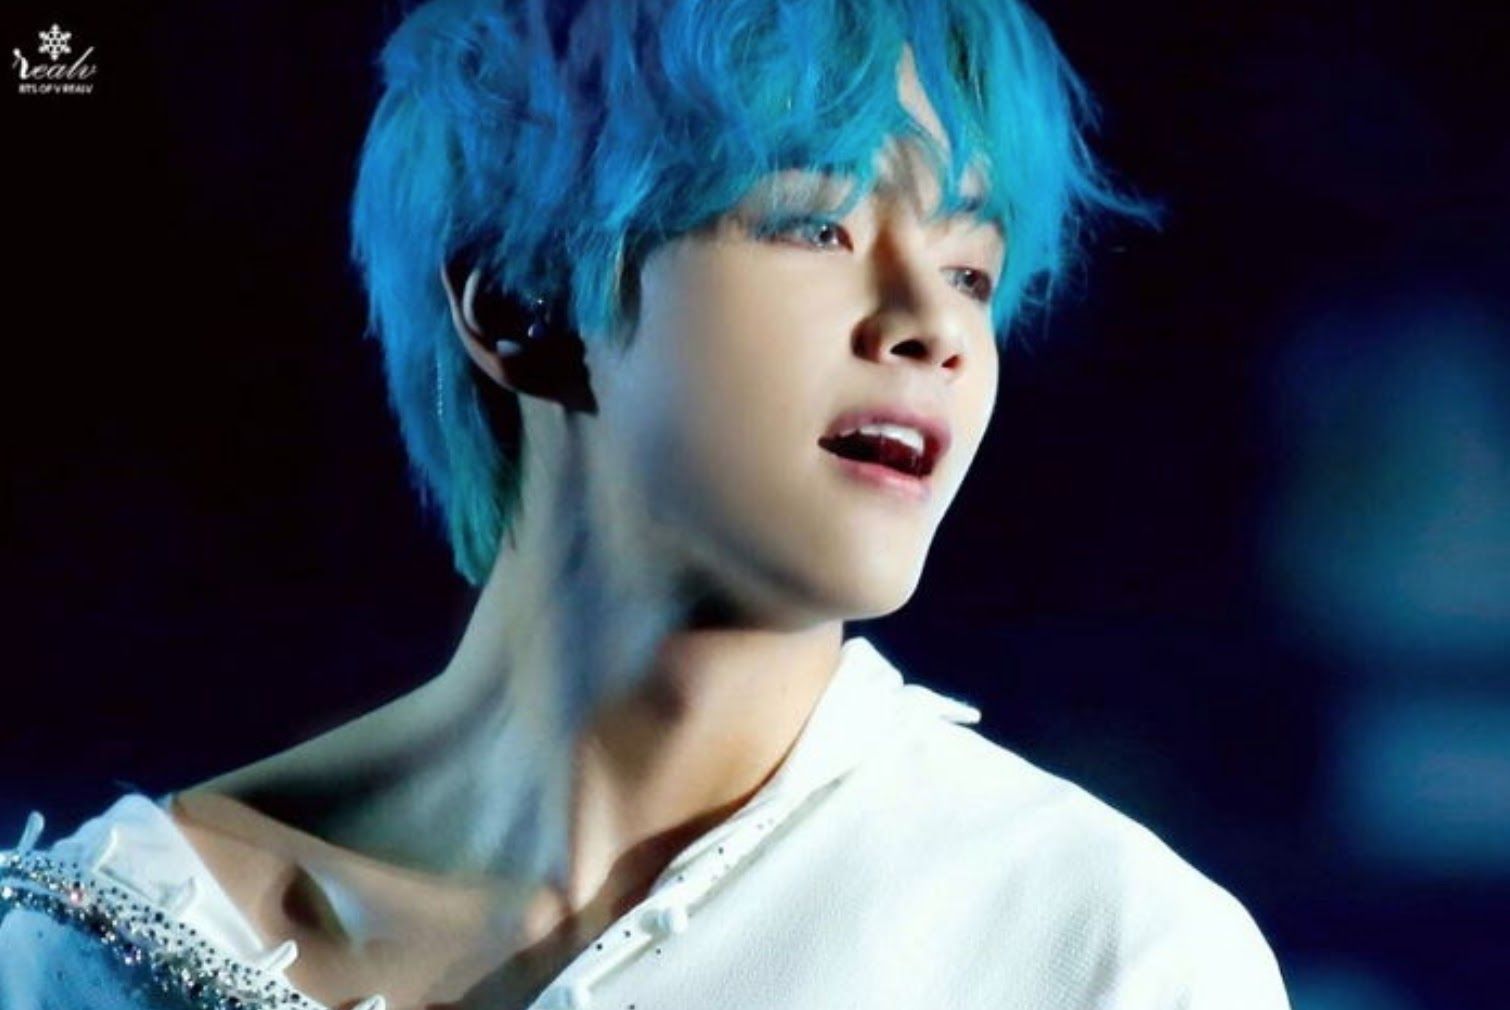 BTS's "Butter" Stage Outfits Feature Blue Hair and Fans Are Loving It - wide 6